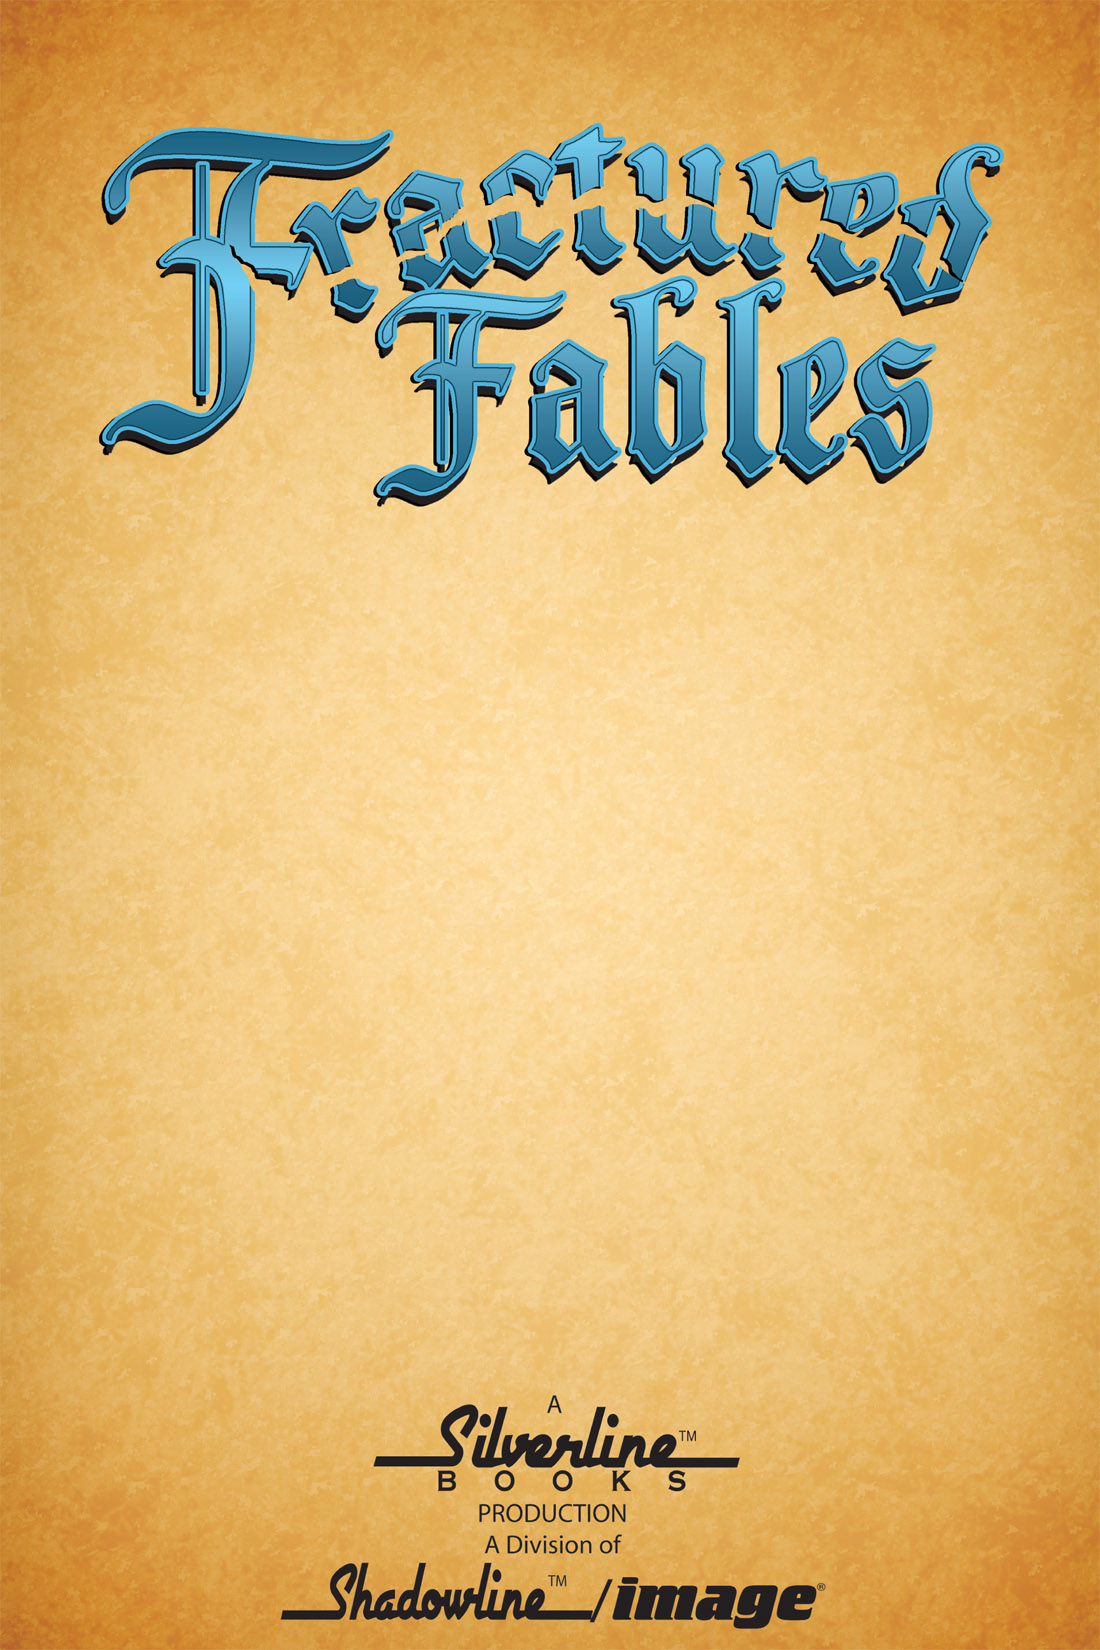 Read online Fractured Fables comic -  Issue # TPB (Part 1) - 2